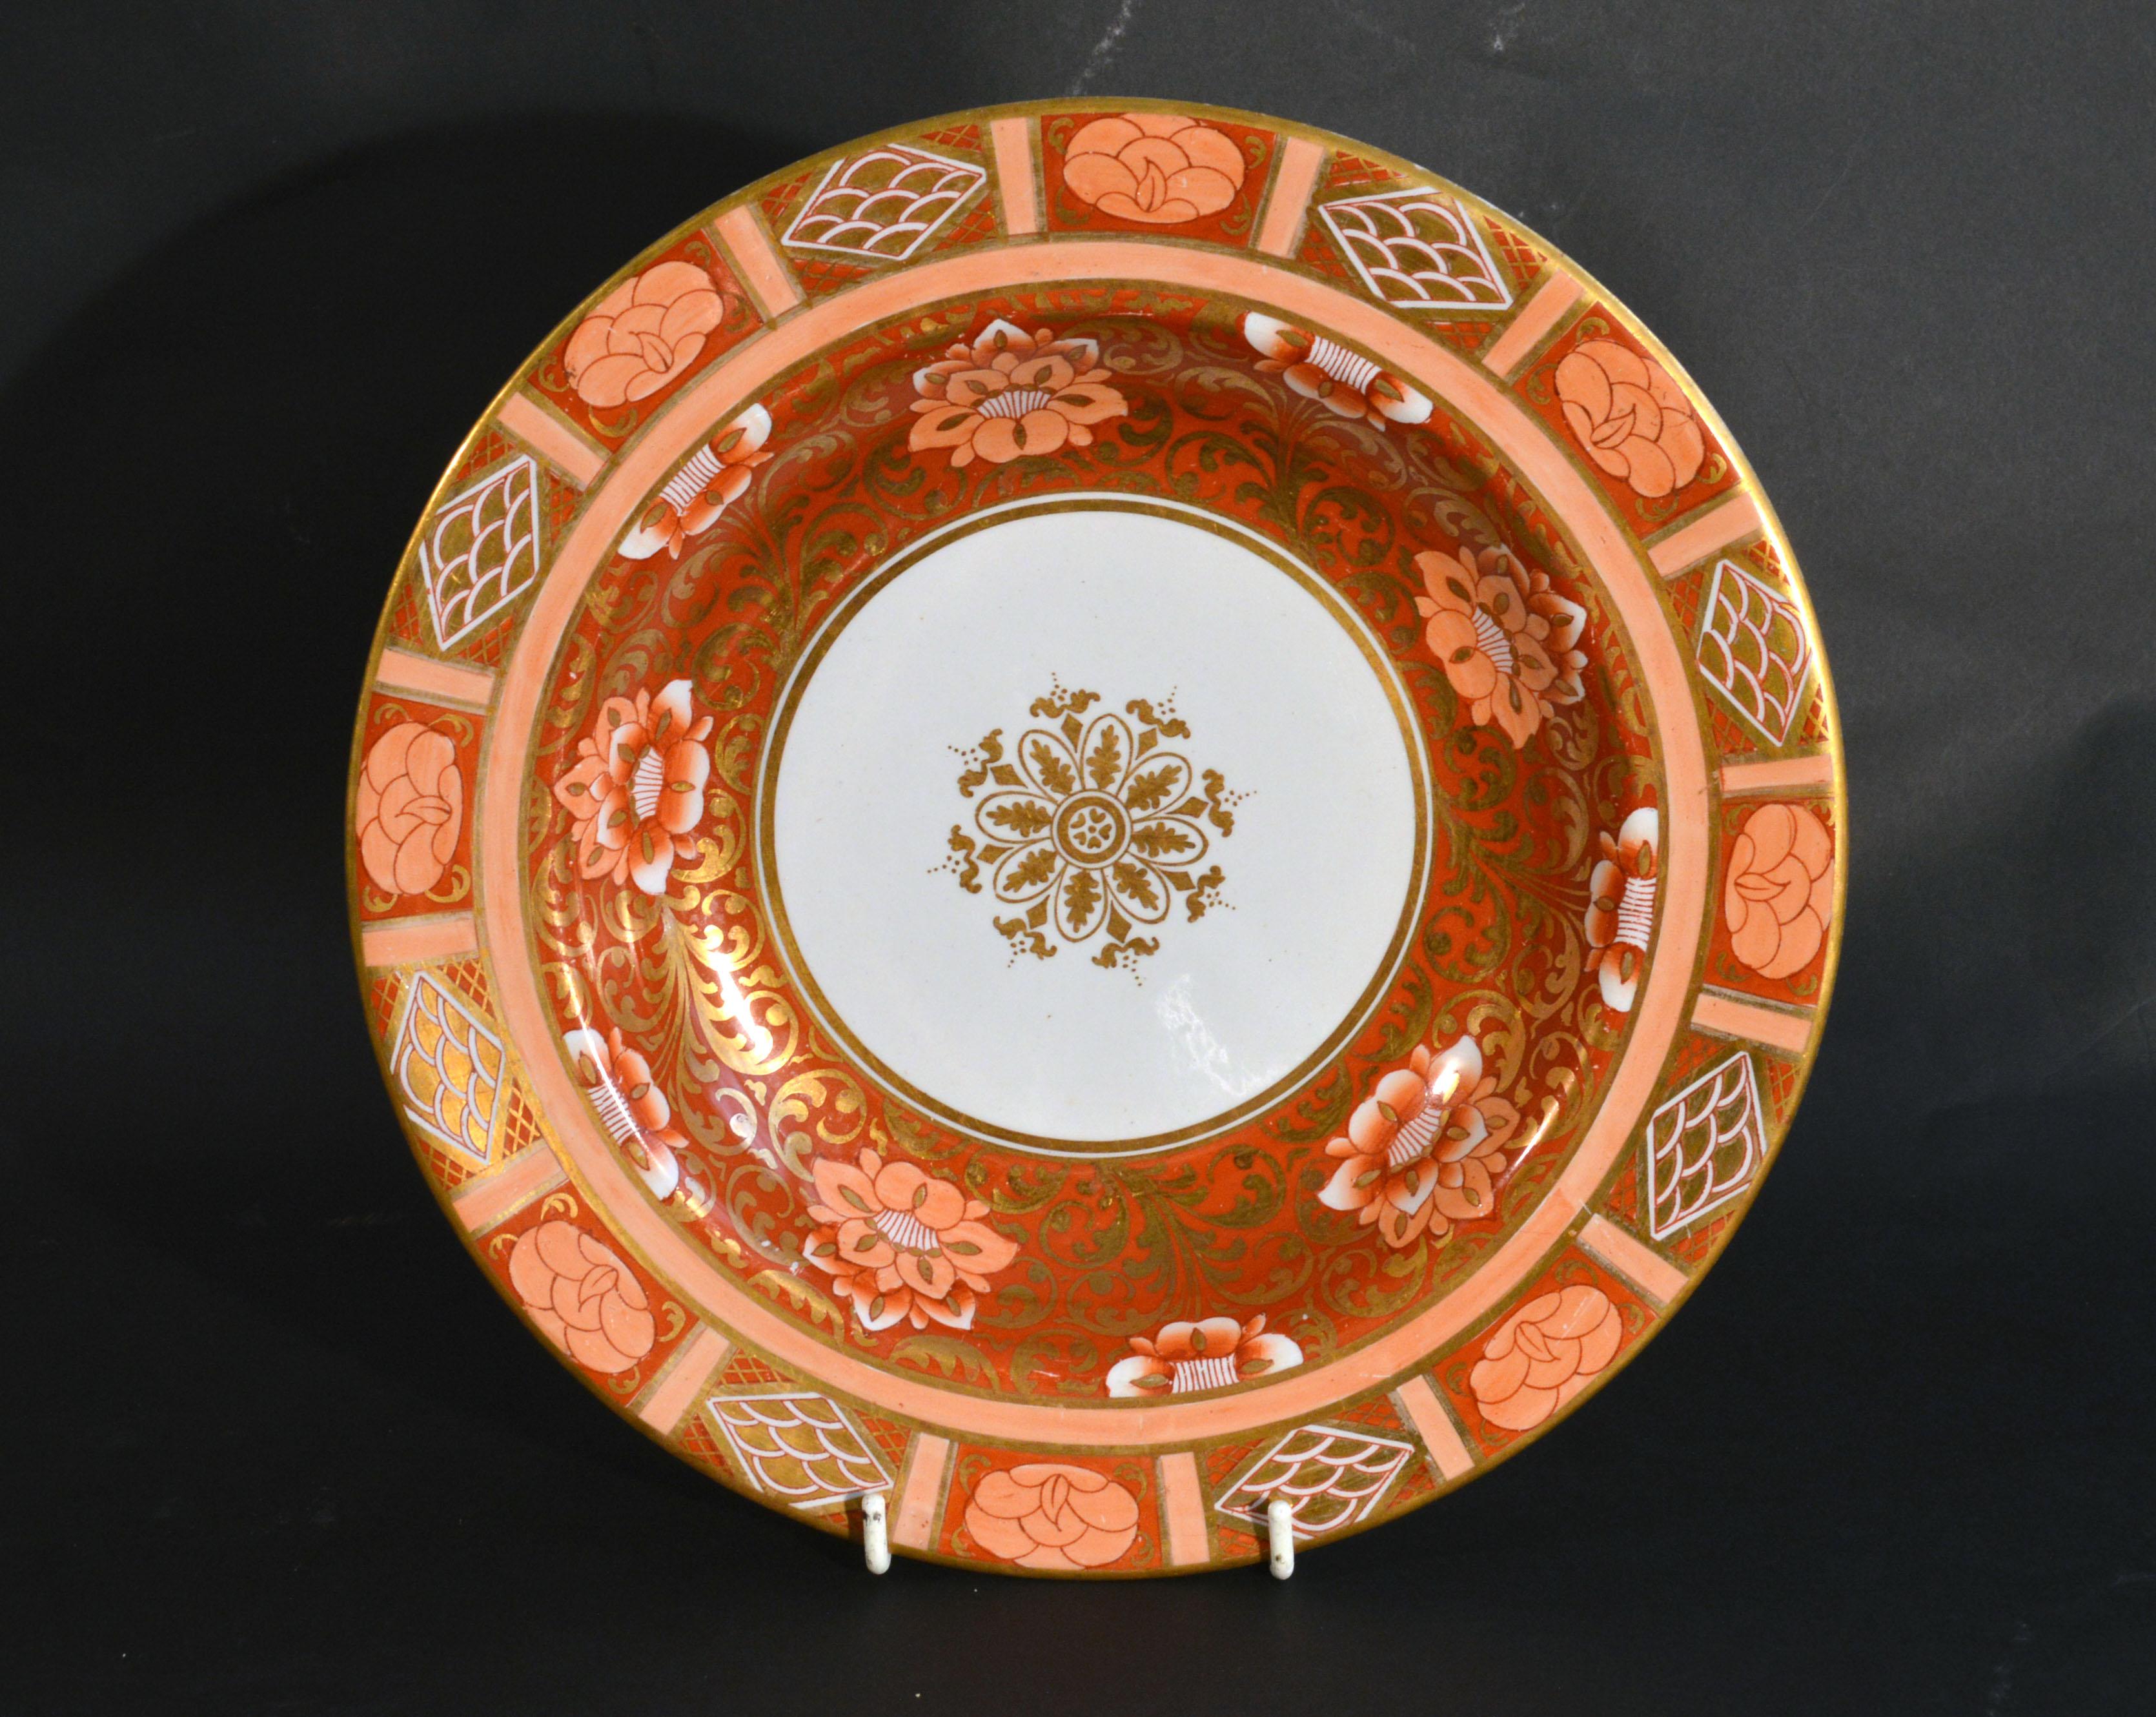 Ashworth Brothers Ironstone Dinner Service, circa 1893, Forty-Five Pieces, 7